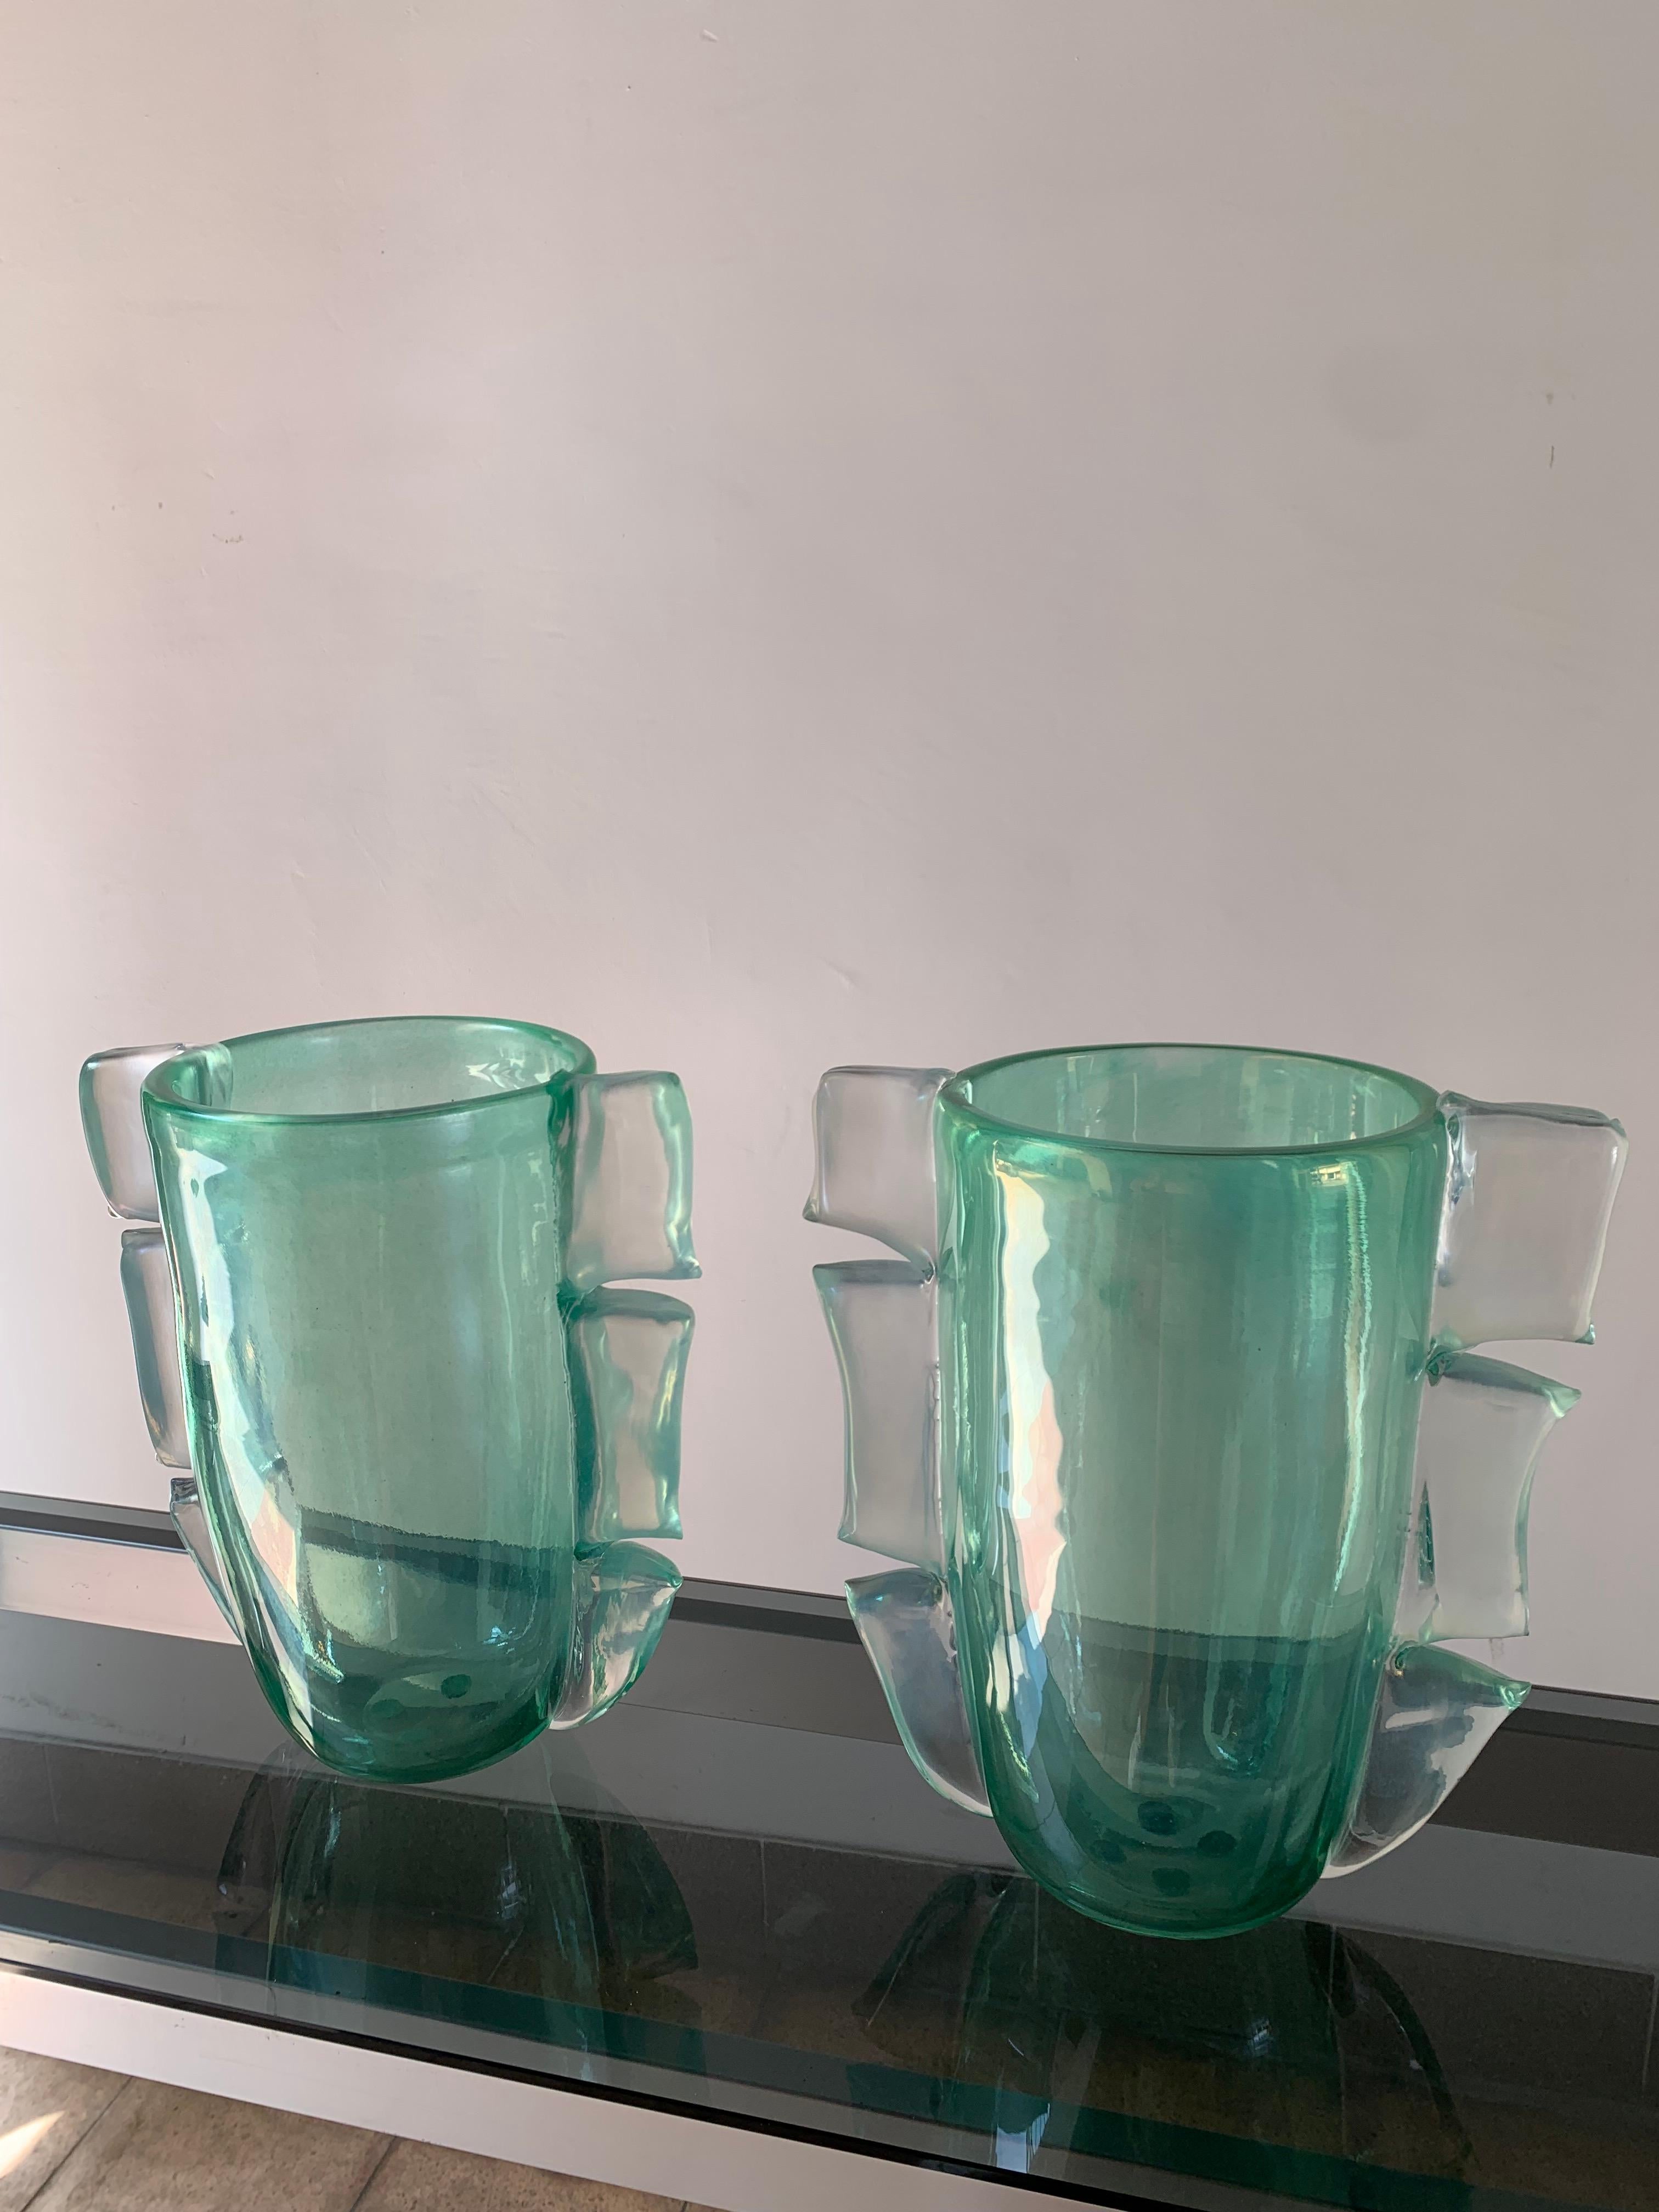 Pair of green Costantini murano Vases, 1990
Signed at the bottom of the vase 